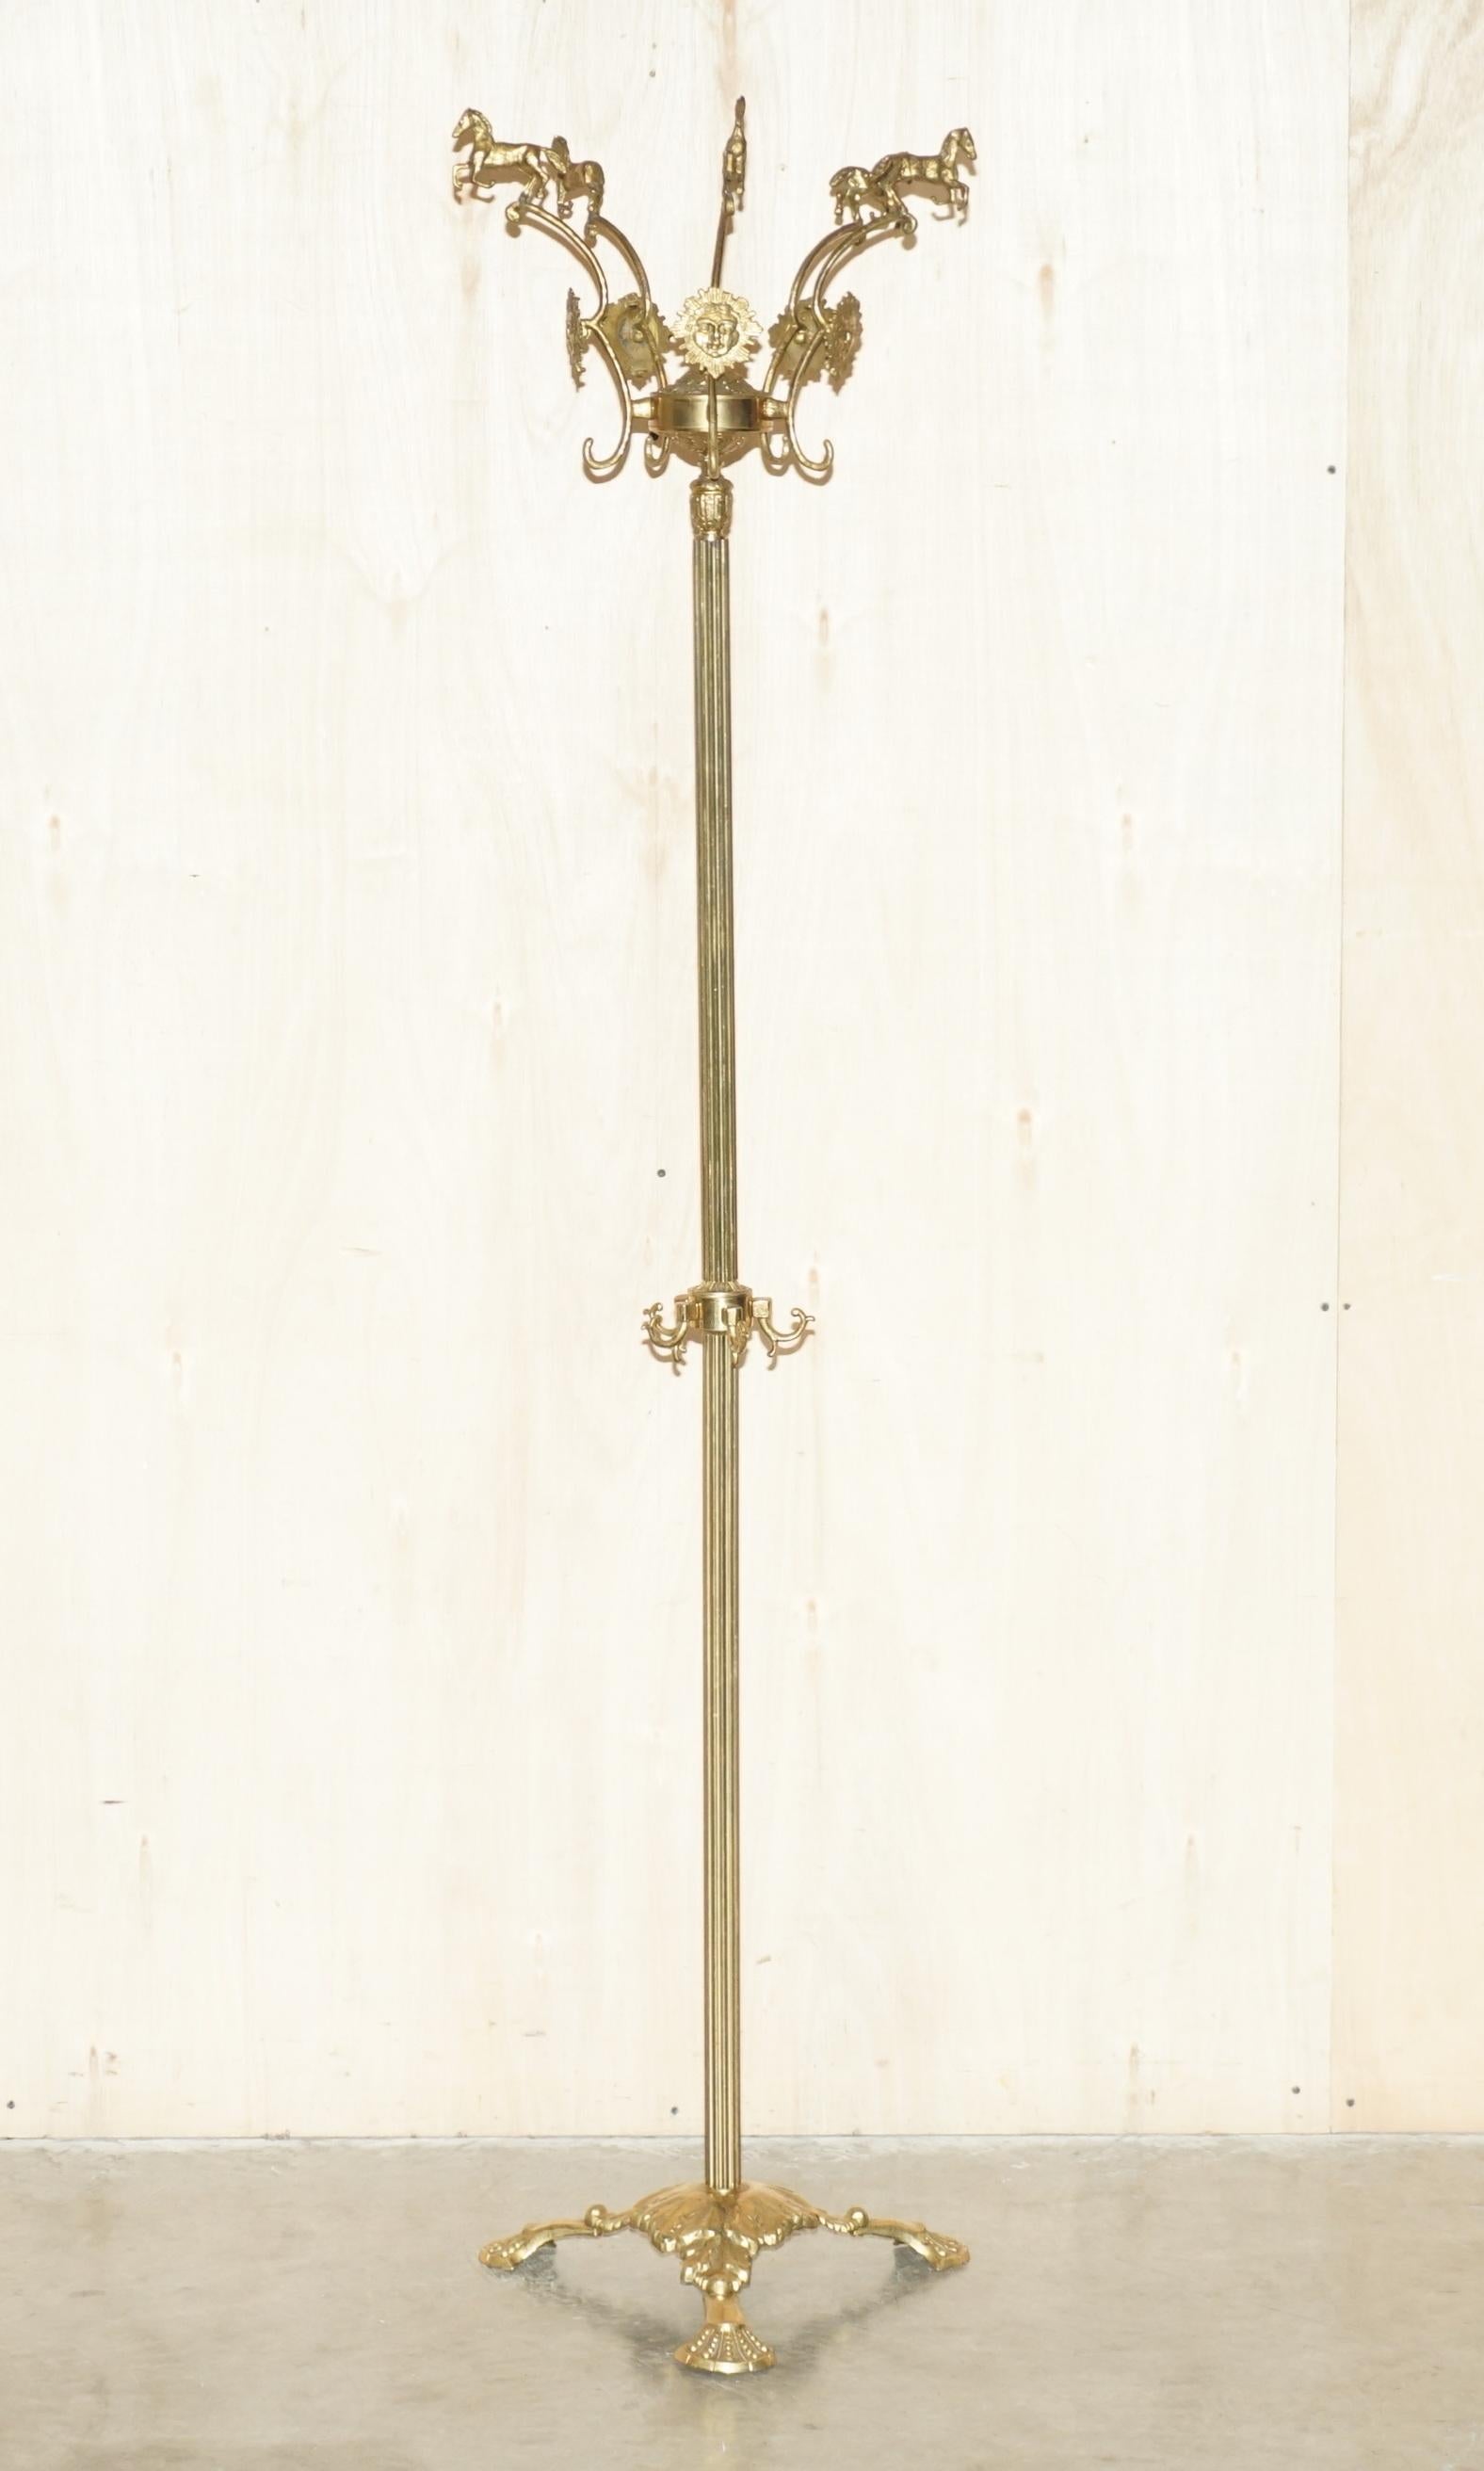 Royal House Antiques

Royal House Antiques is delighted to offer for sale this stunning original English circa 1880 brass hat glove and coat stand with rare Stallion horses and Sunface heads

Please note the delivery fee listed is just a guide, it